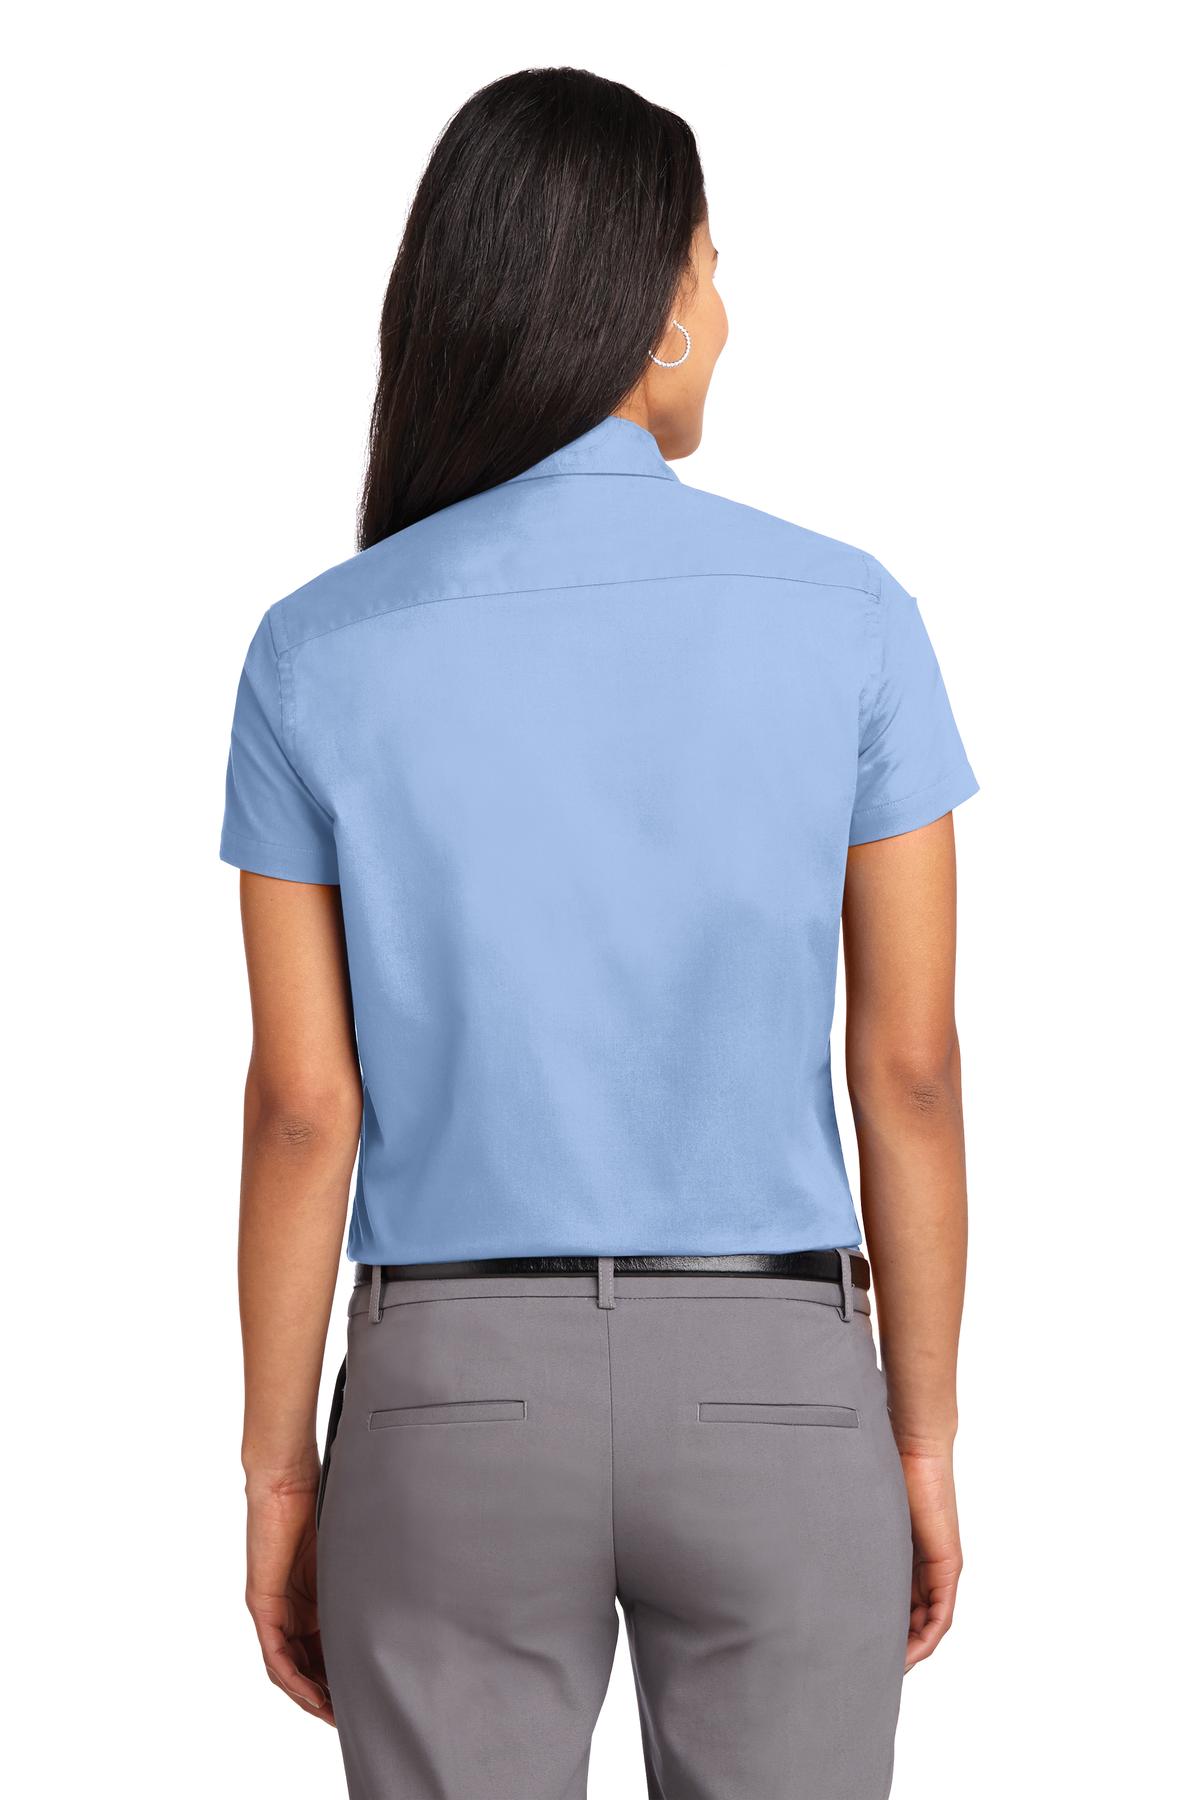 Port Authority WomenS Short Sleeve Easy Care Shirt. L508. - image 2 of 6